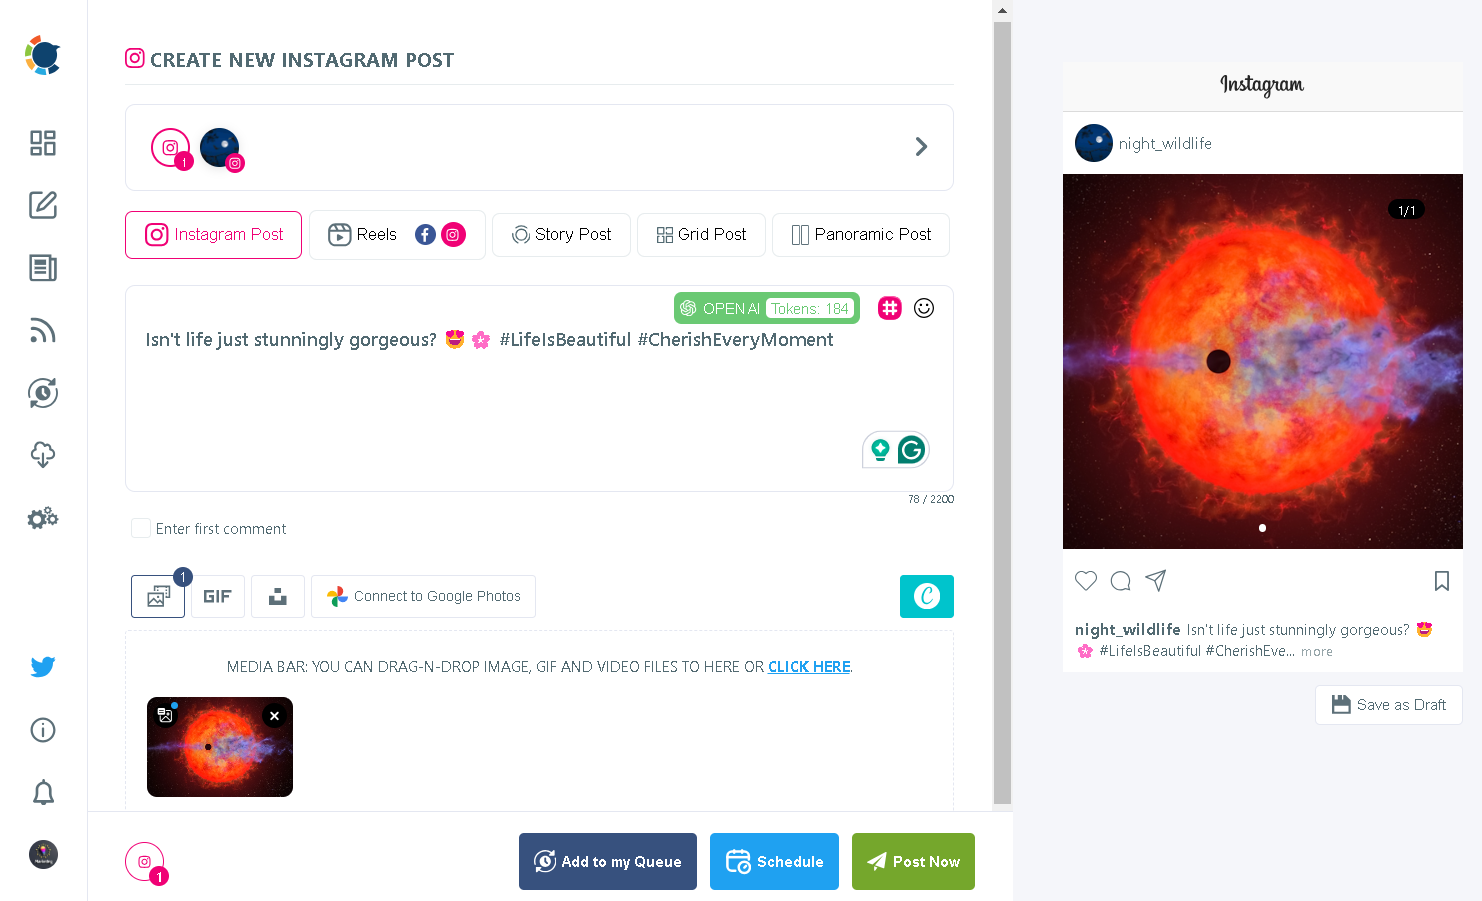 Combining different post types will help you fix low engagement on Instagram.